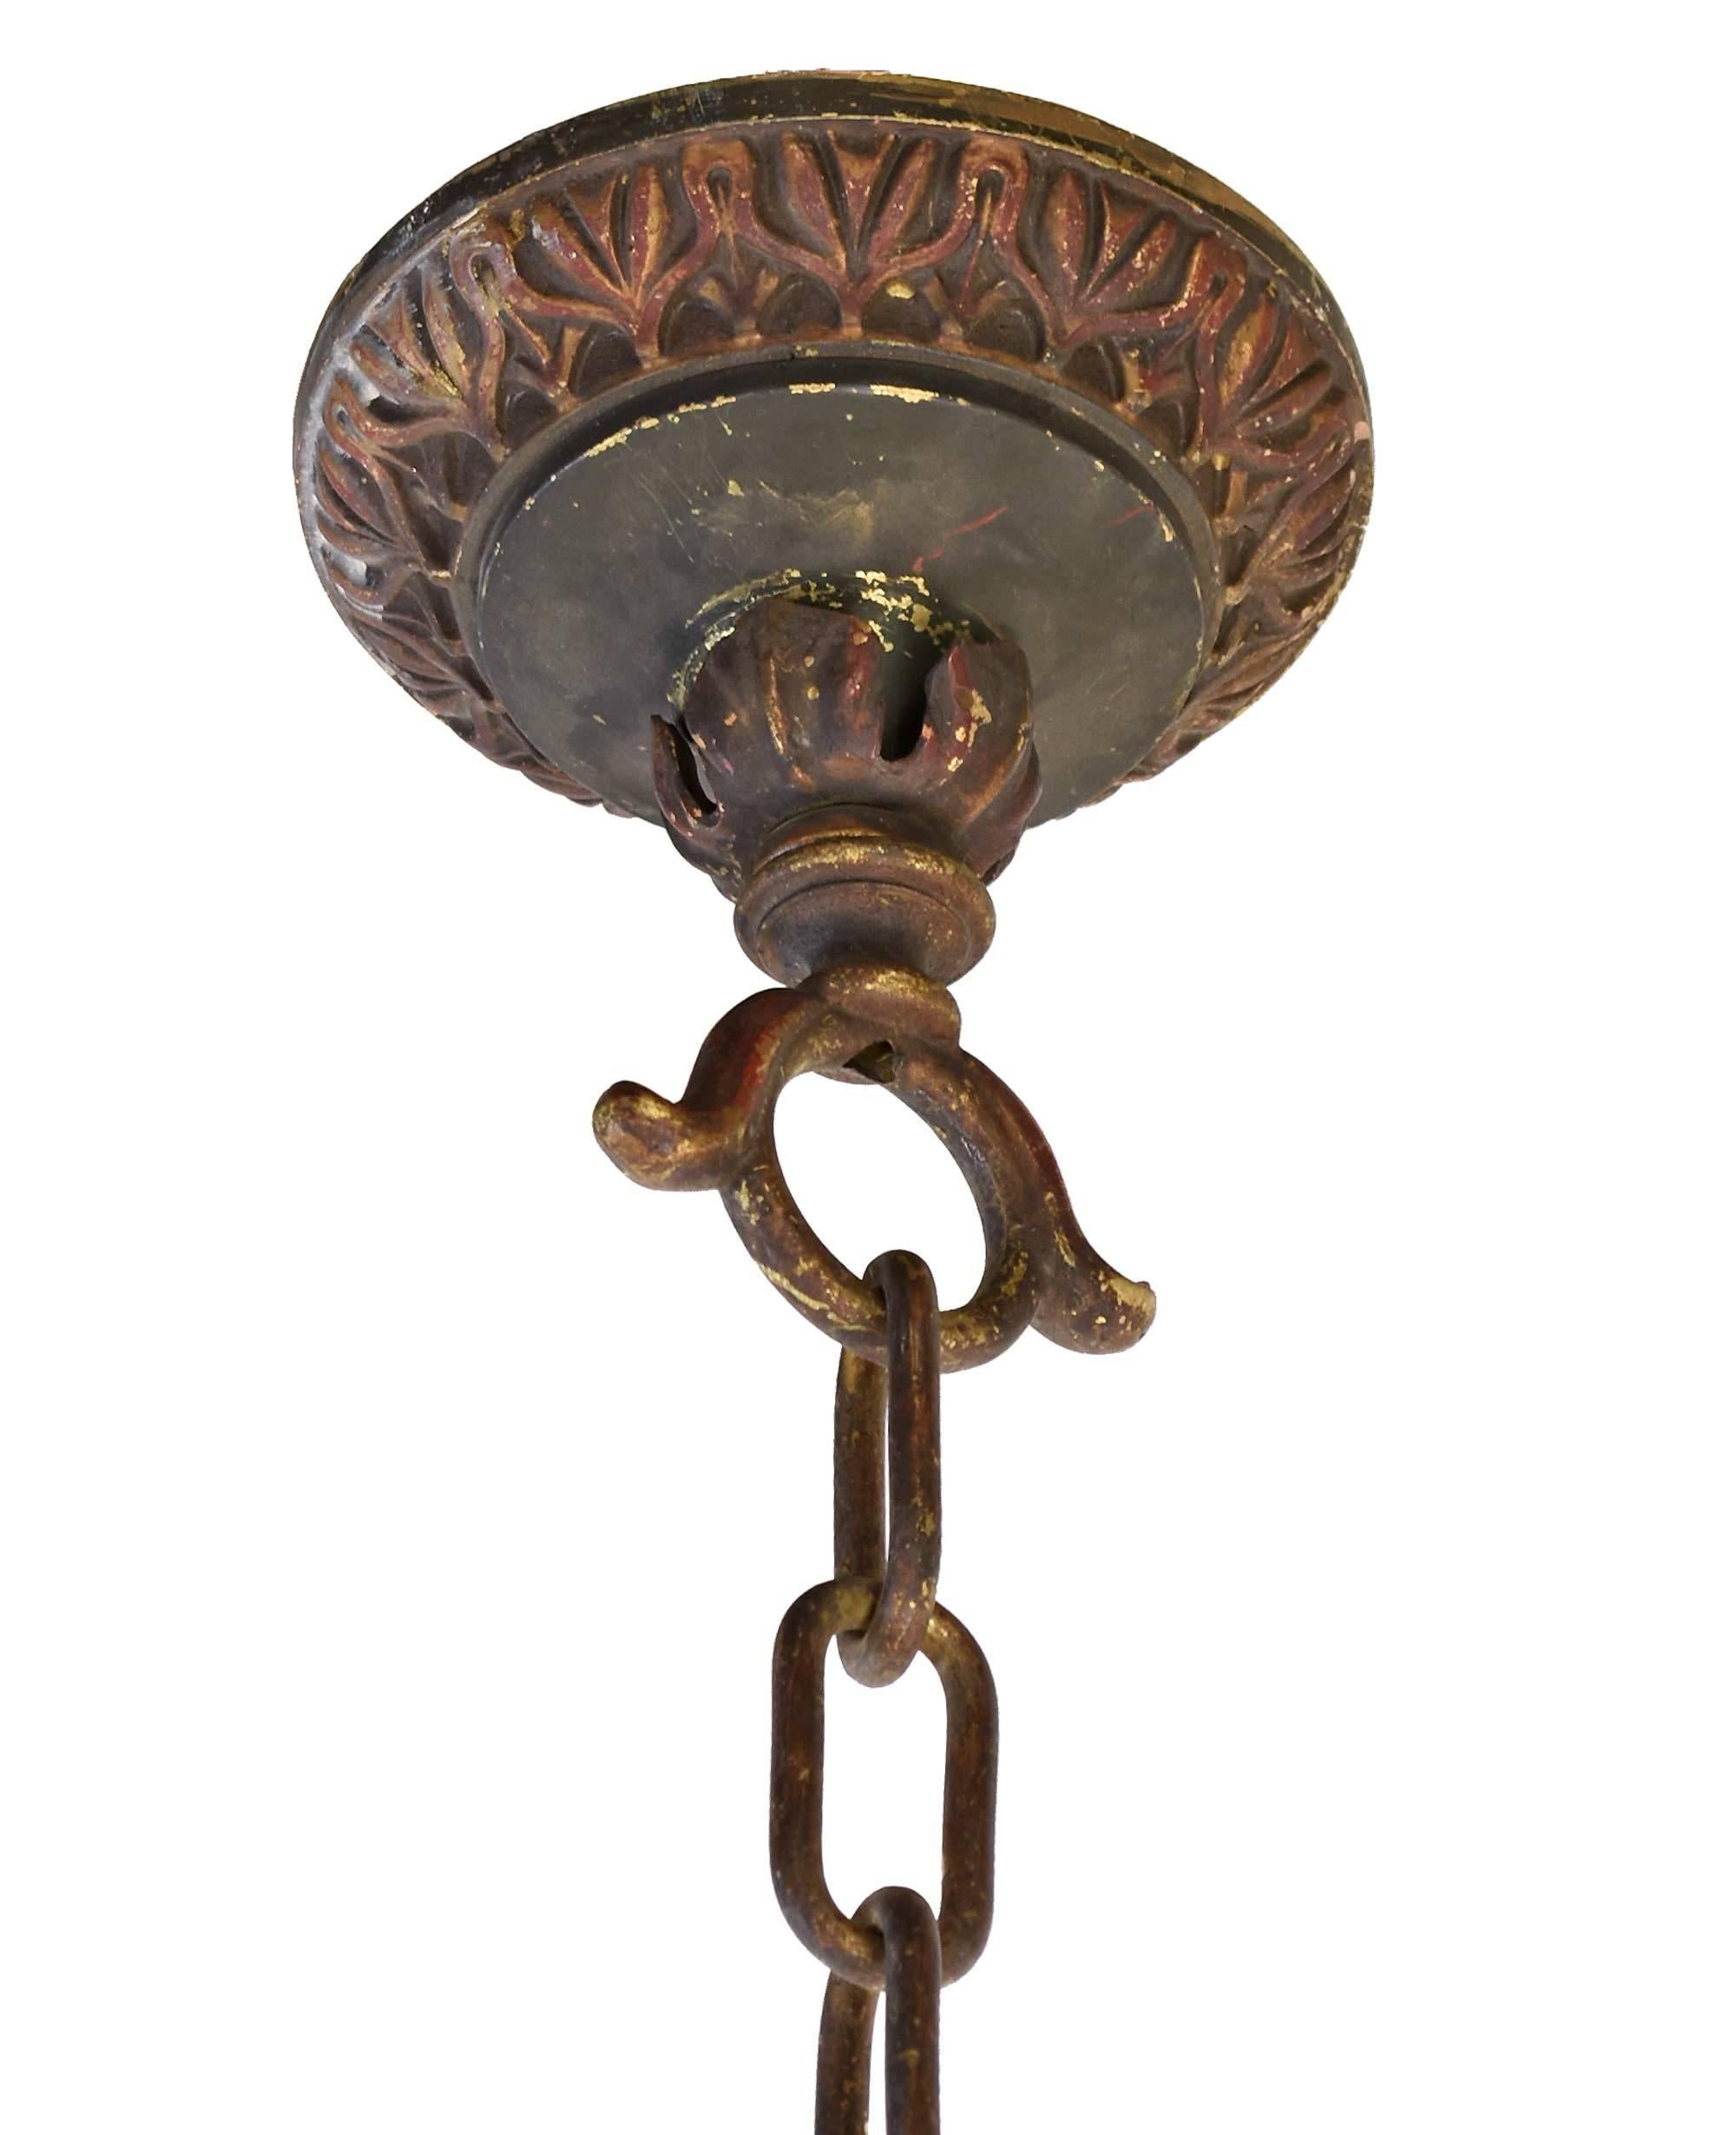 Cast Early American Iron and Brass Theatre Fixture